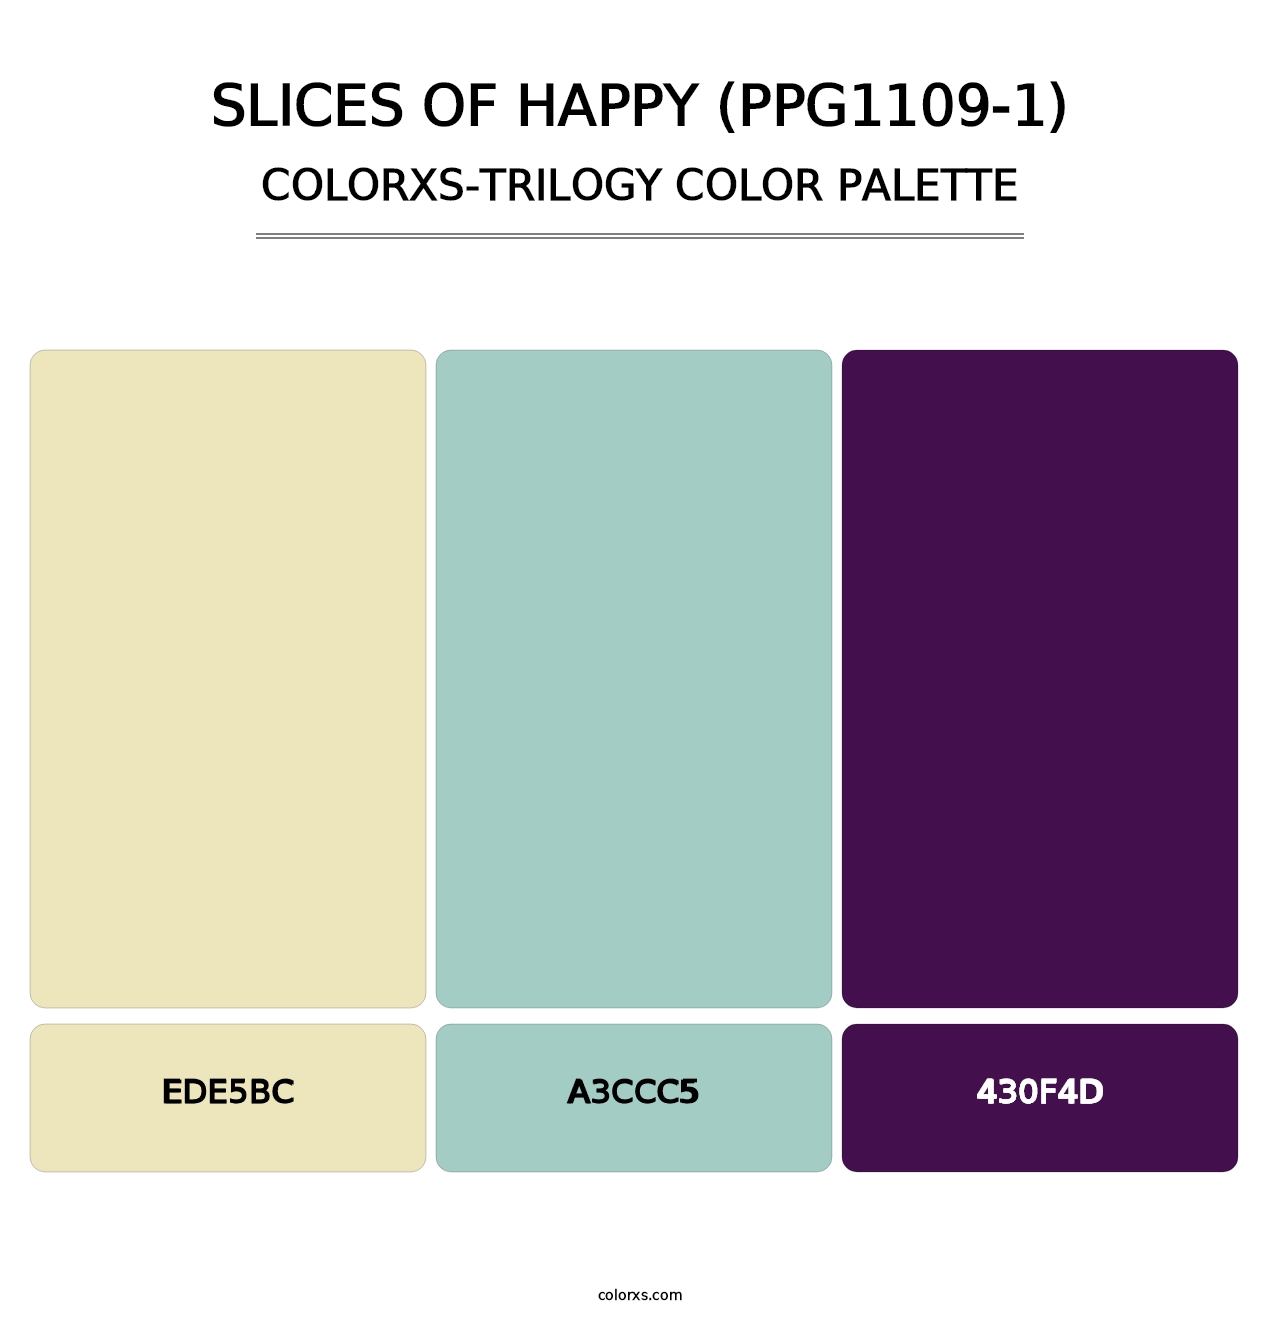 Slices Of Happy (PPG1109-1) - Colorxs Trilogy Palette